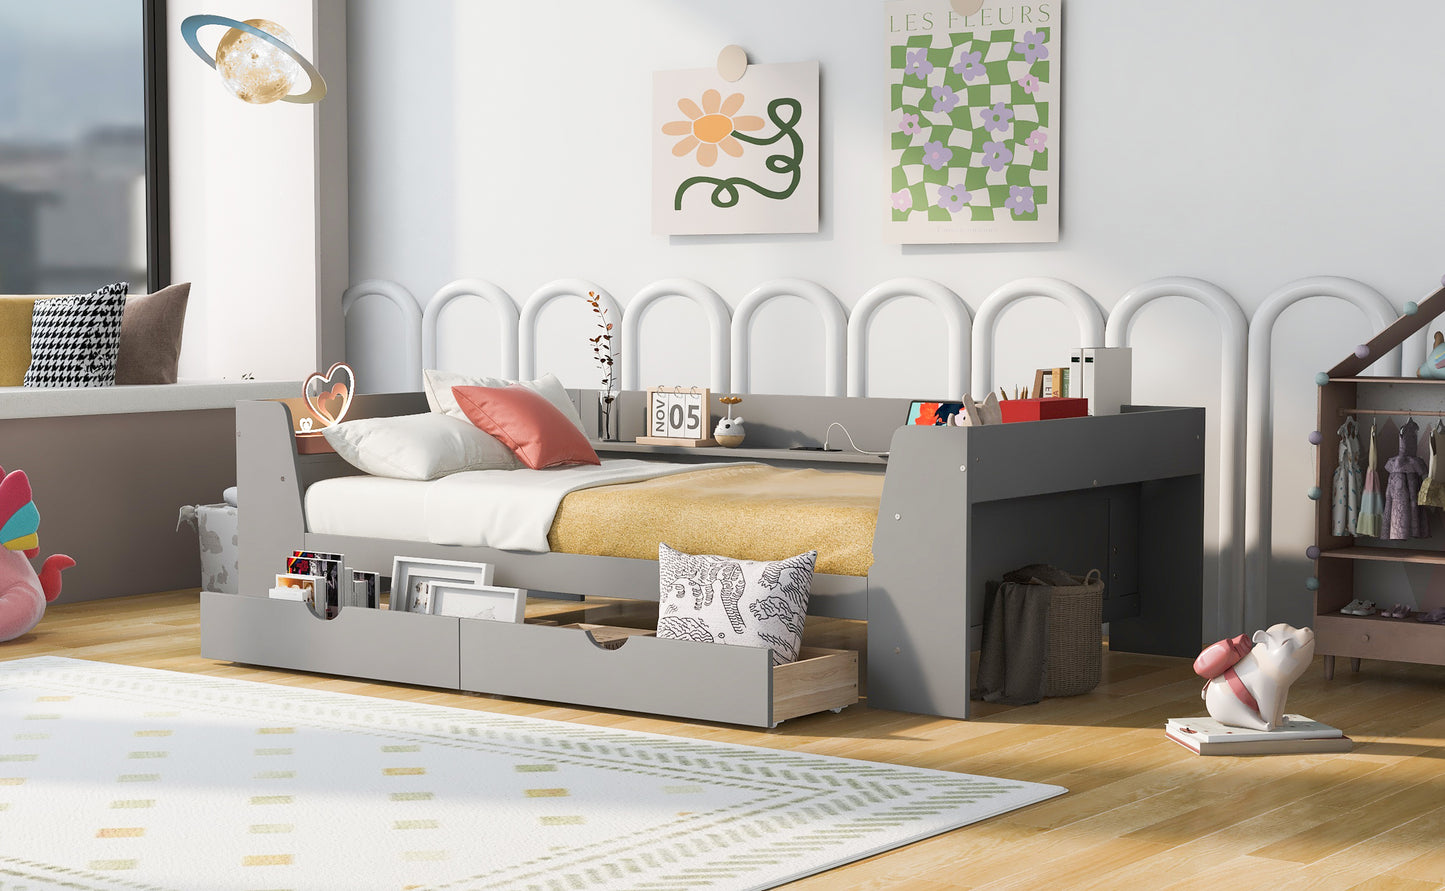 Twin Size Daybed with Shelves, Drawers and Built-In Charging Station, Gray